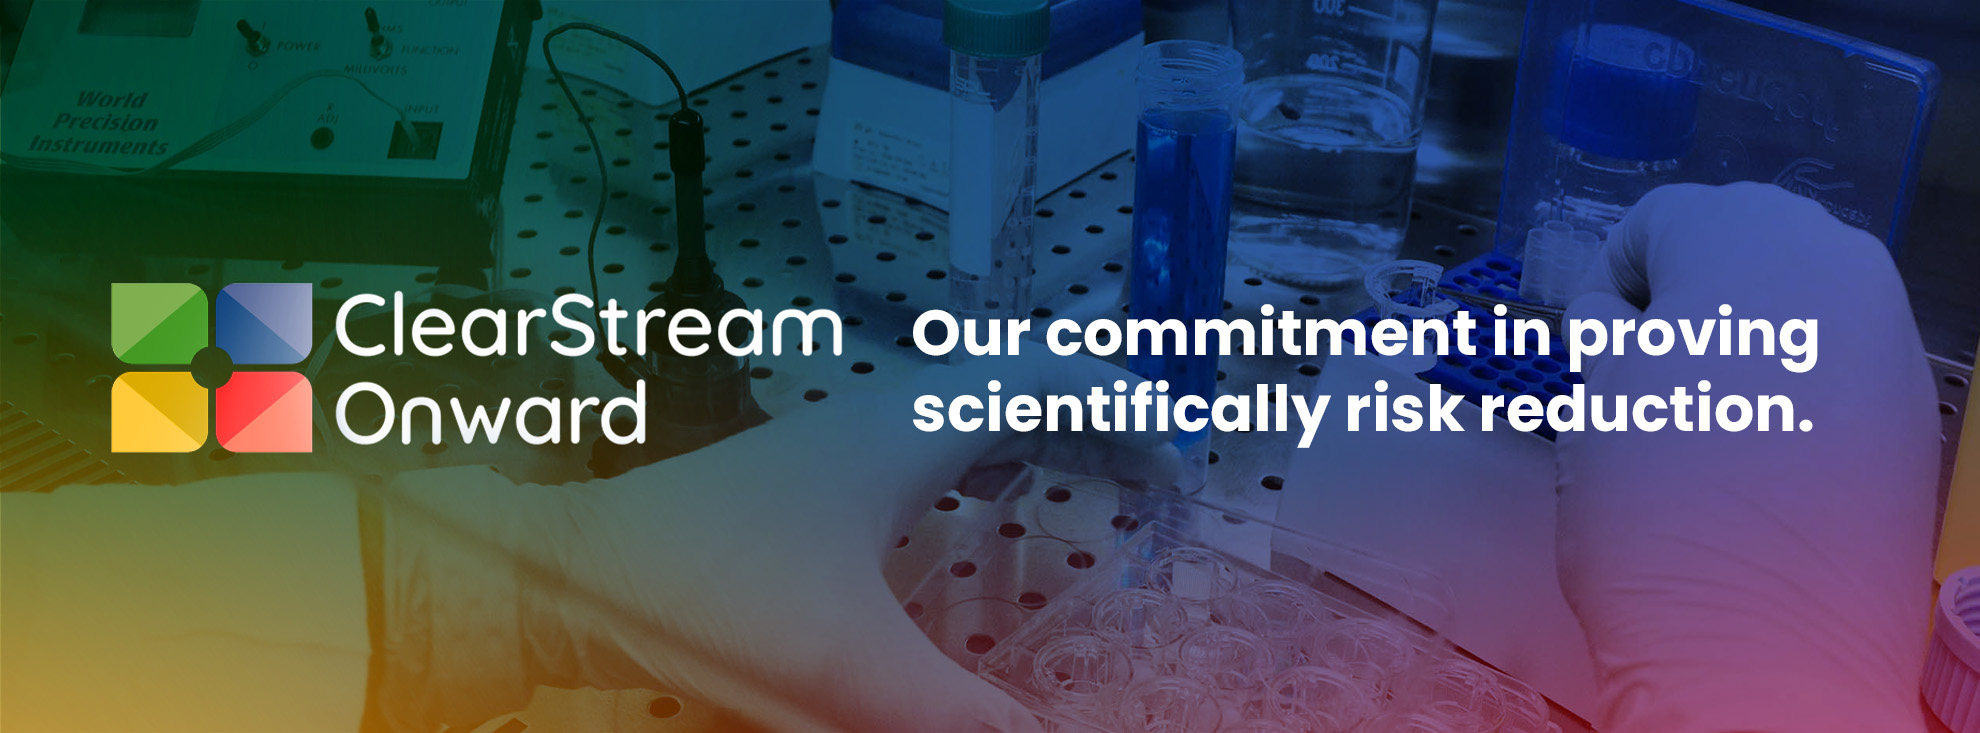 Clear Stream Onward. Our commitment in proving. Scientifically risk reduction.